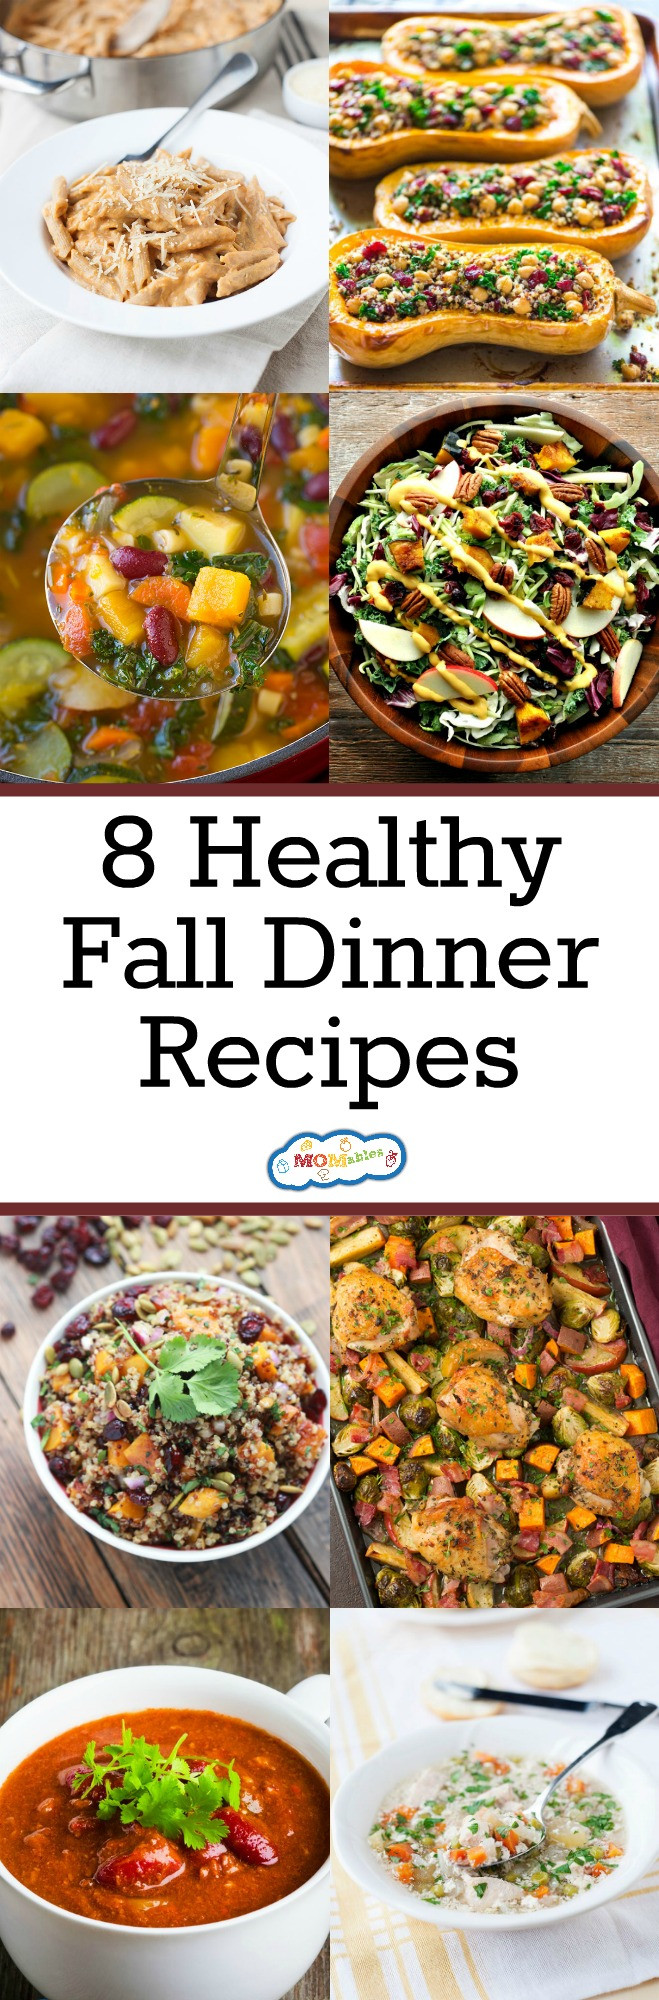 Fall Weeknight Dinners
 8 Healthy Fall Dinner Recipes MOMables Good Food